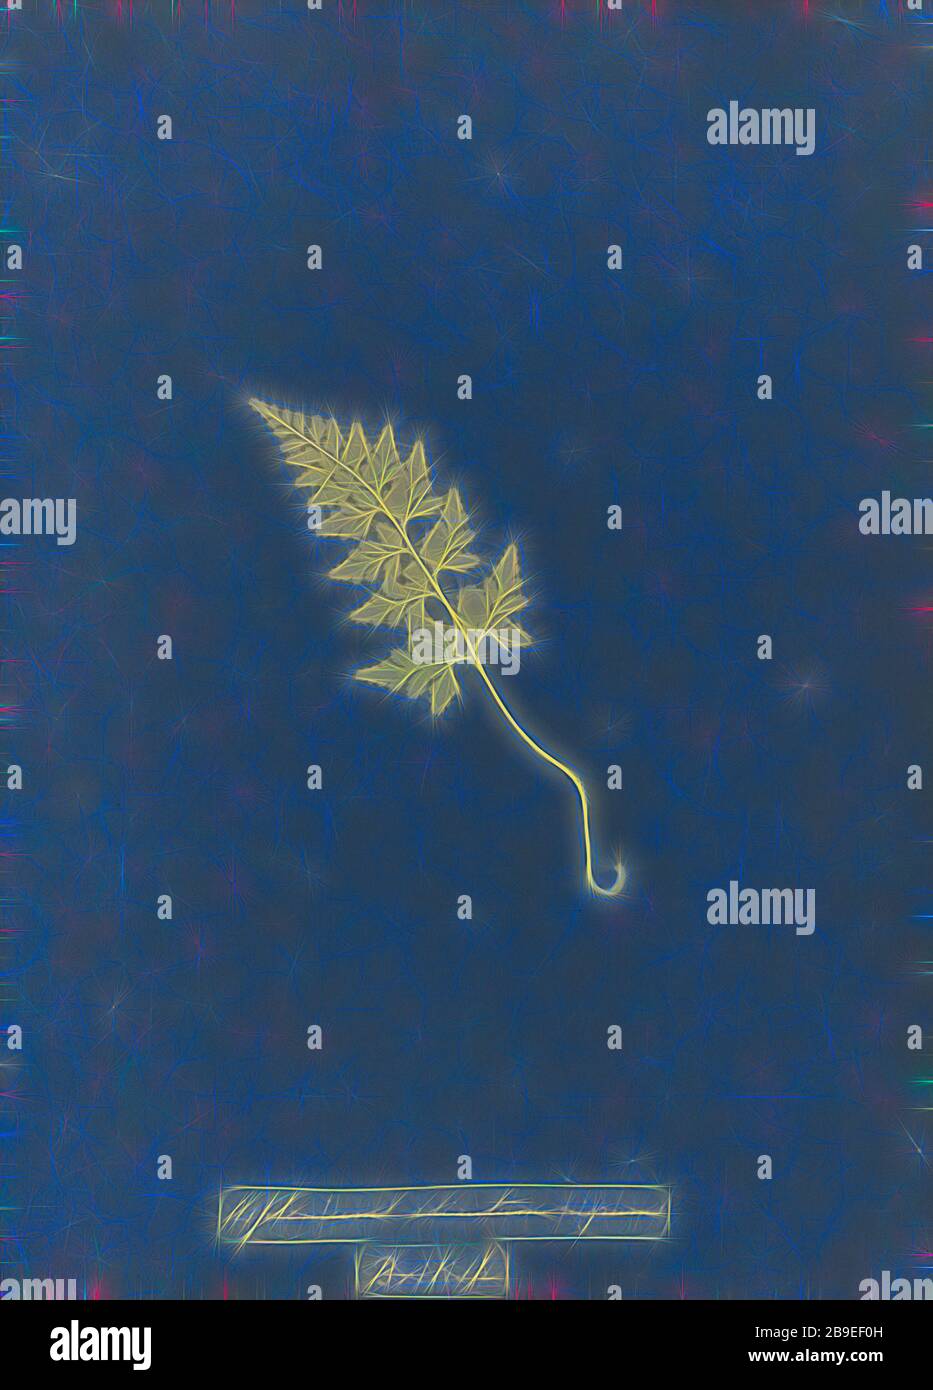 Asplenium adiantum nigrum, British, Anna Atkins (British, 1799 - 1871), England, 1853, Cyanotype, 25.4 × 19.4 cm (10 × 7 5,8 in, Reimagined by Gibon, design of warm cheerful glowing of brightness and light rays radiance. Classic art reinvented with a modern twist. Photography inspired by futurism, embracing dynamic energy of modern technology, movement, speed and revolutionize culture. Stock Photo